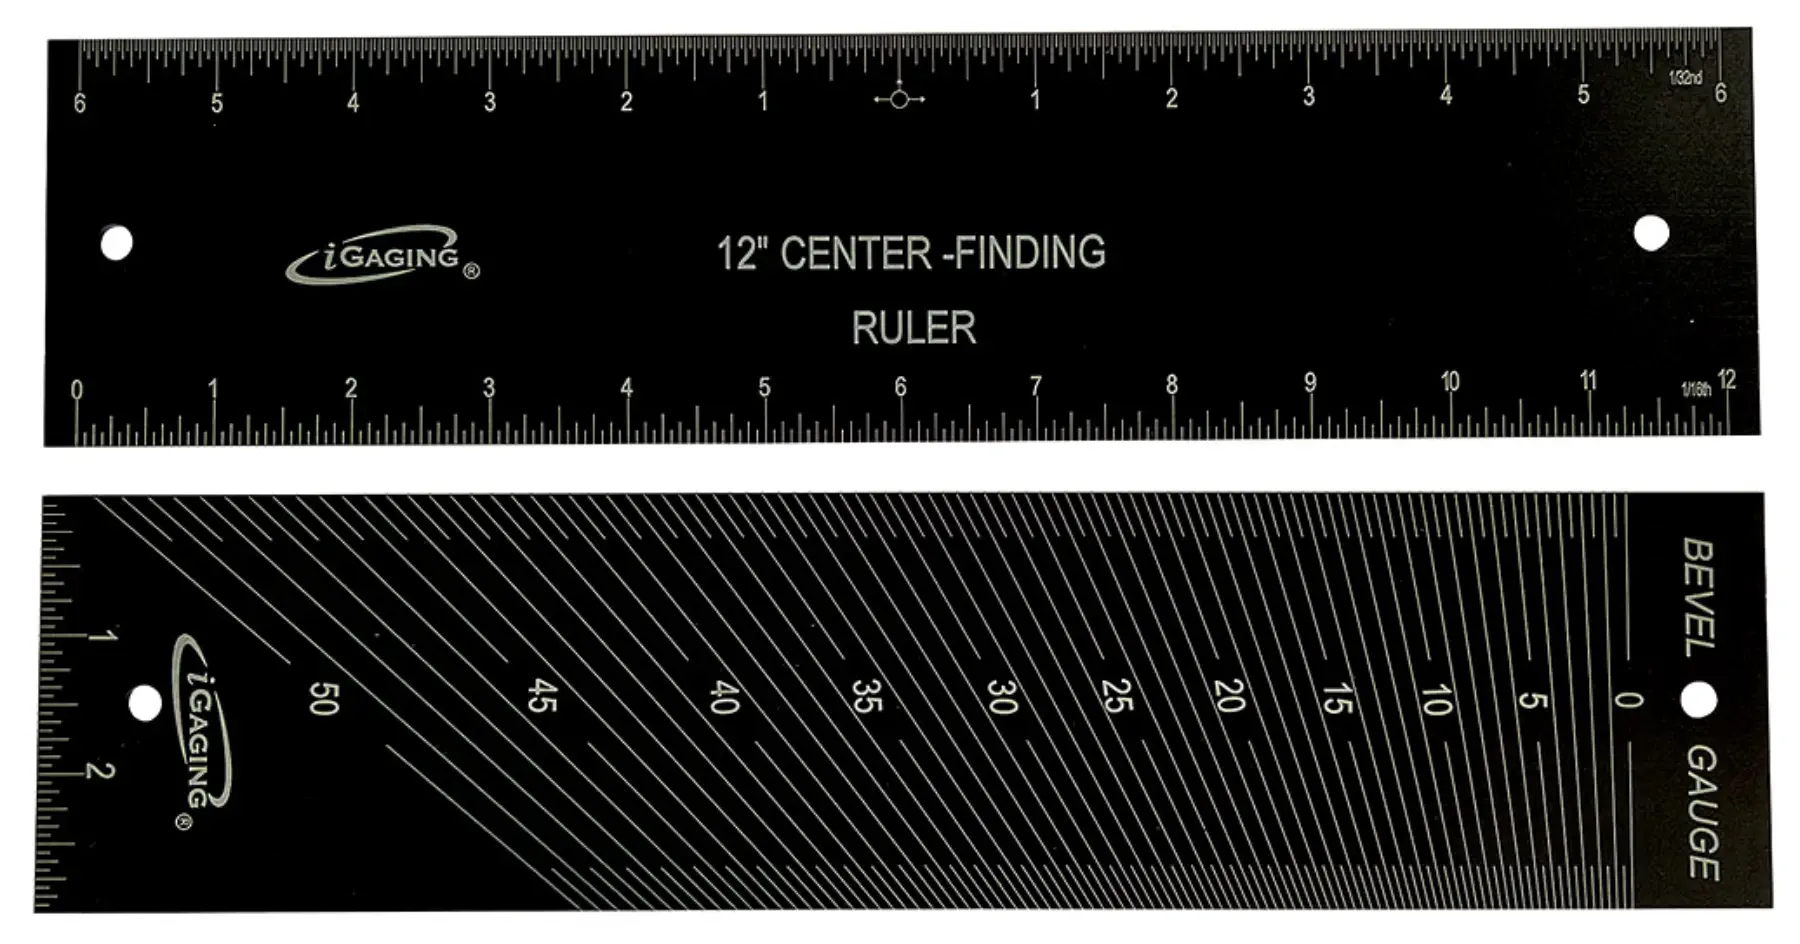 iGAGING Metric 300mm center rule and angle gauge 